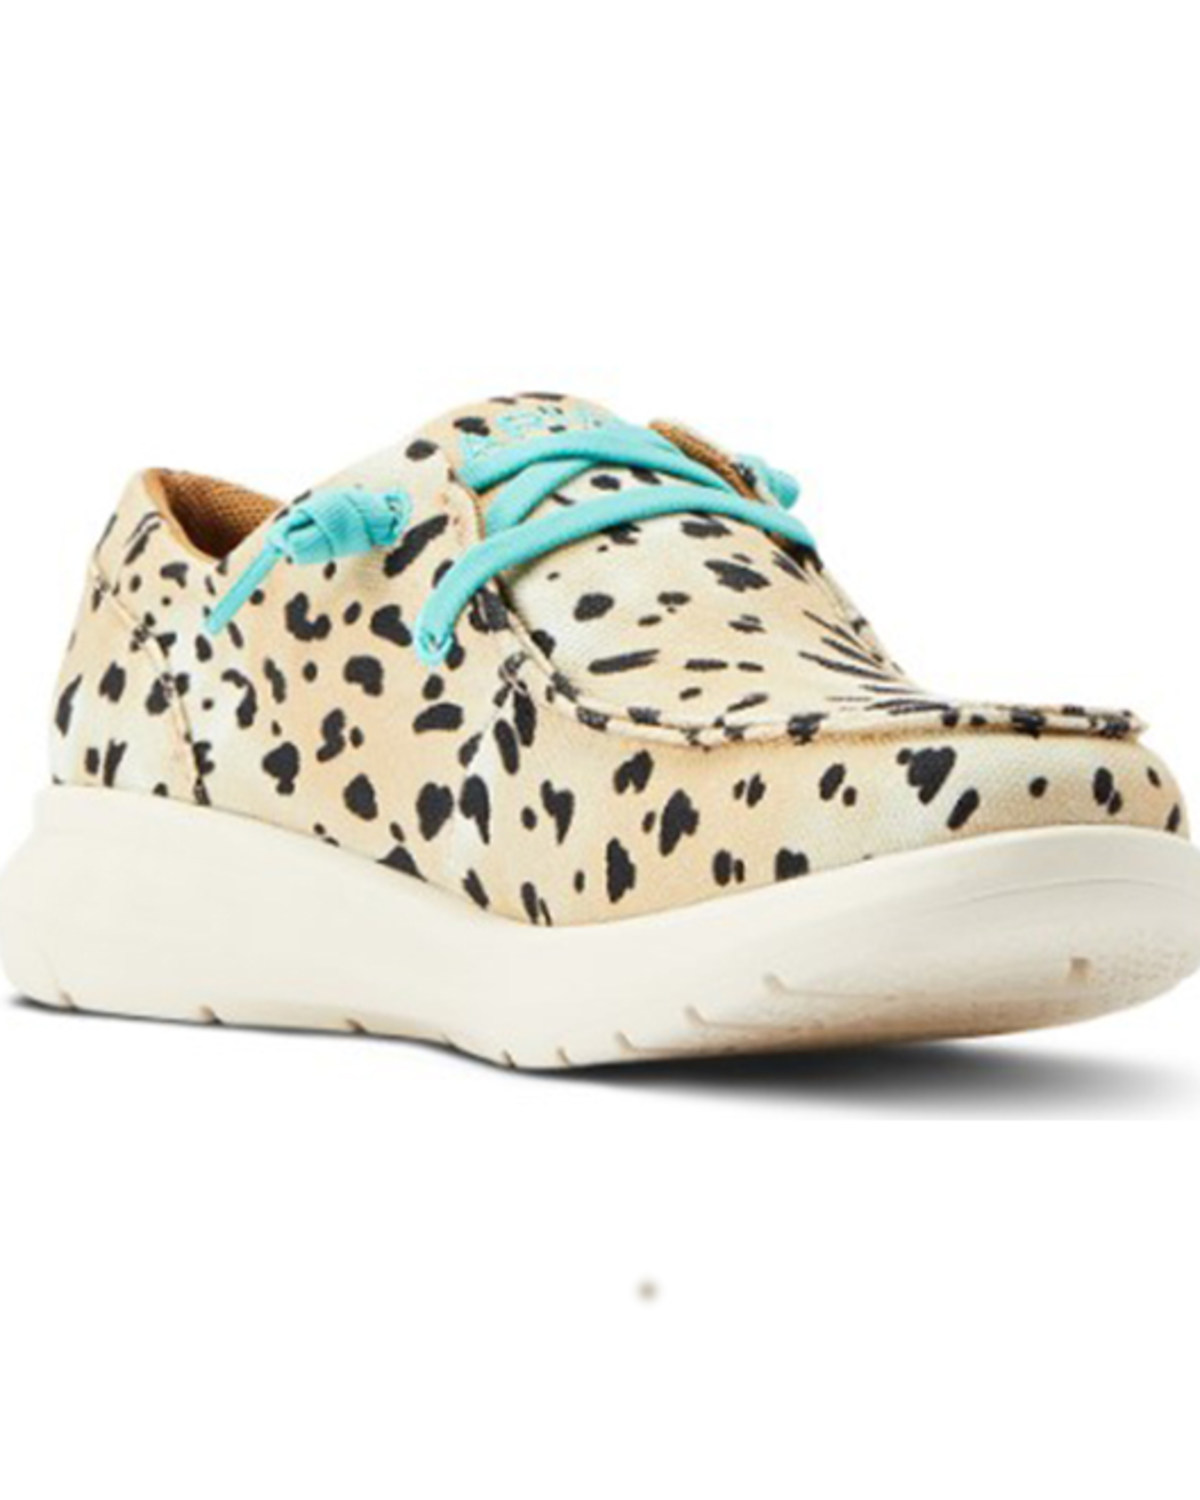 Ariat Women's Hilo Animal Print Casual Lace-Up Shoes - Moc Toe